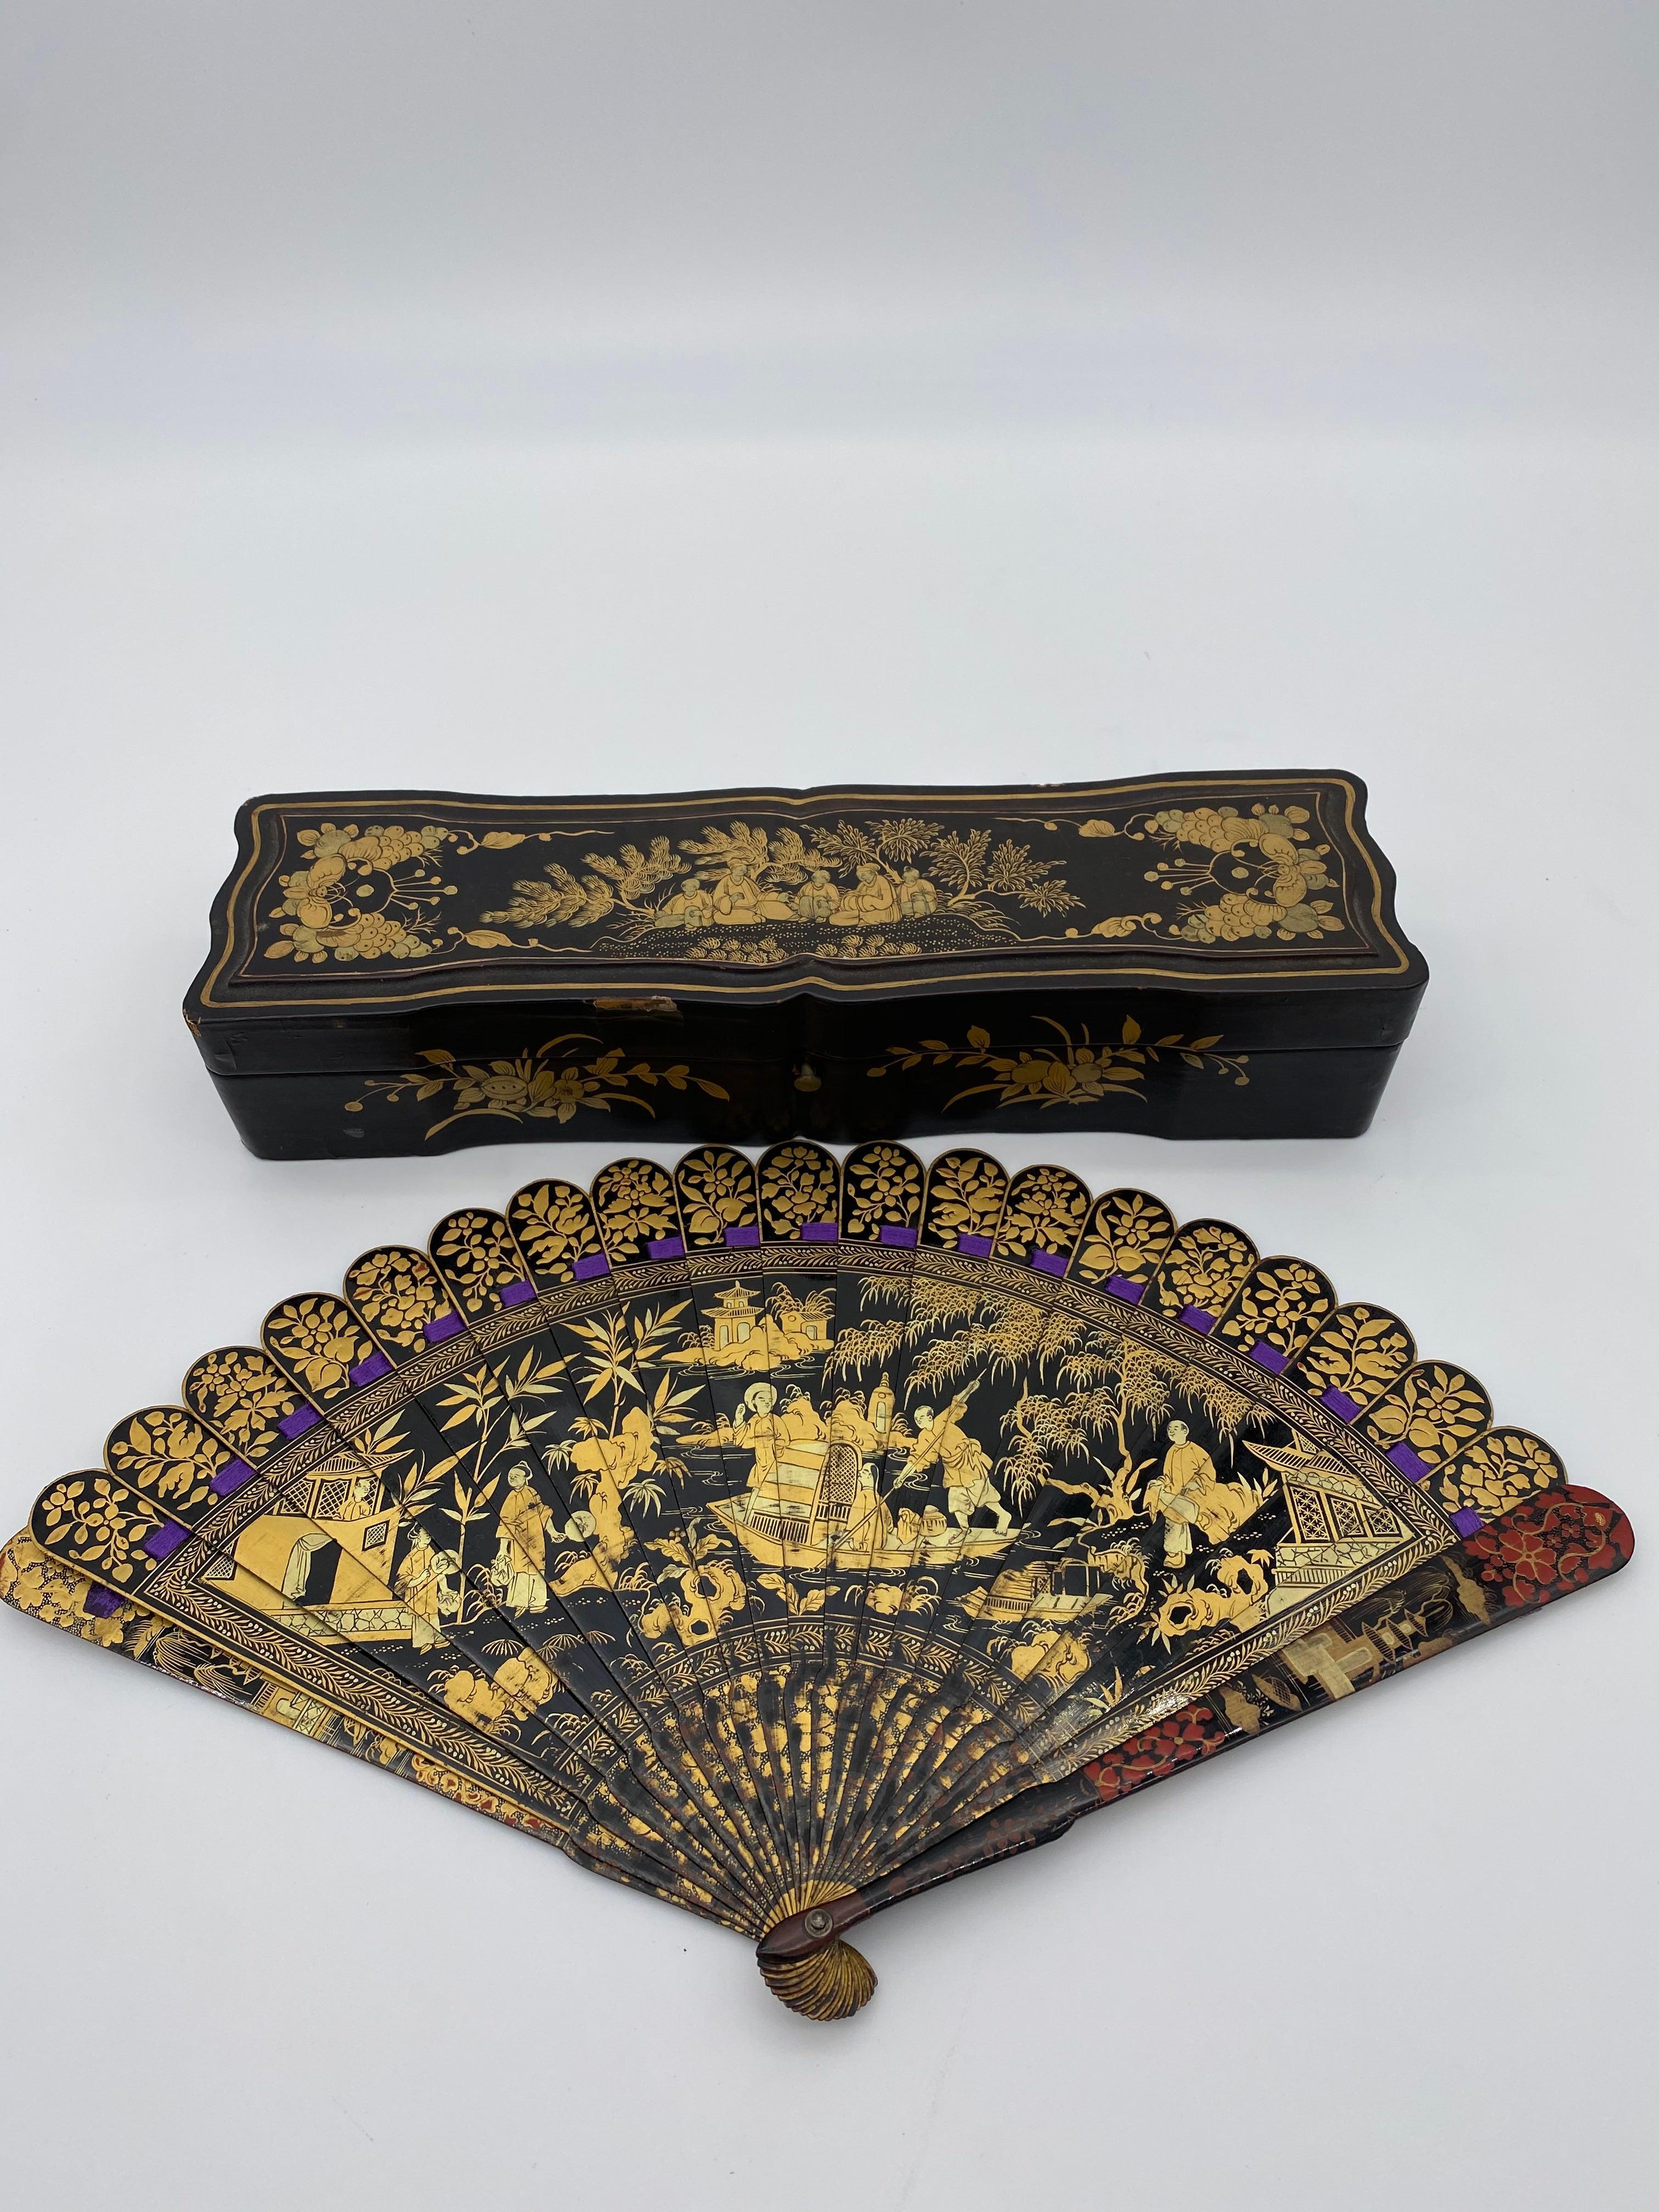 Antique Chinese Hand Painted Lacquer Scene Gilt Fan with Lacquer Box For Sale 1